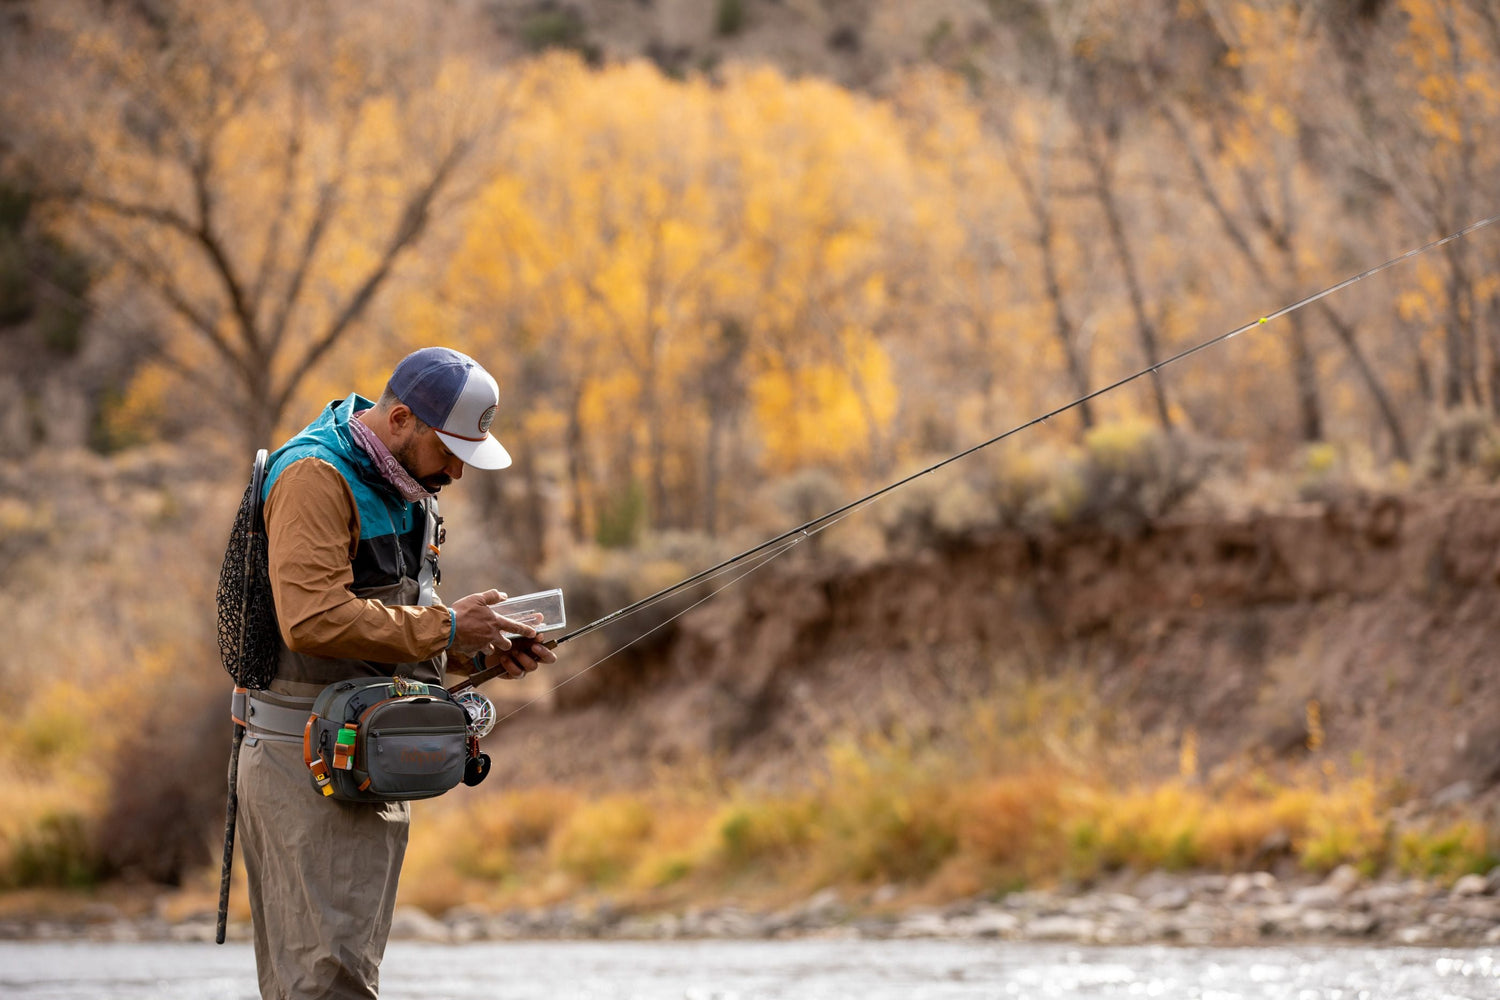 How To Carry A Fly Fishing Net (Solved) - Fly Fishing Fix